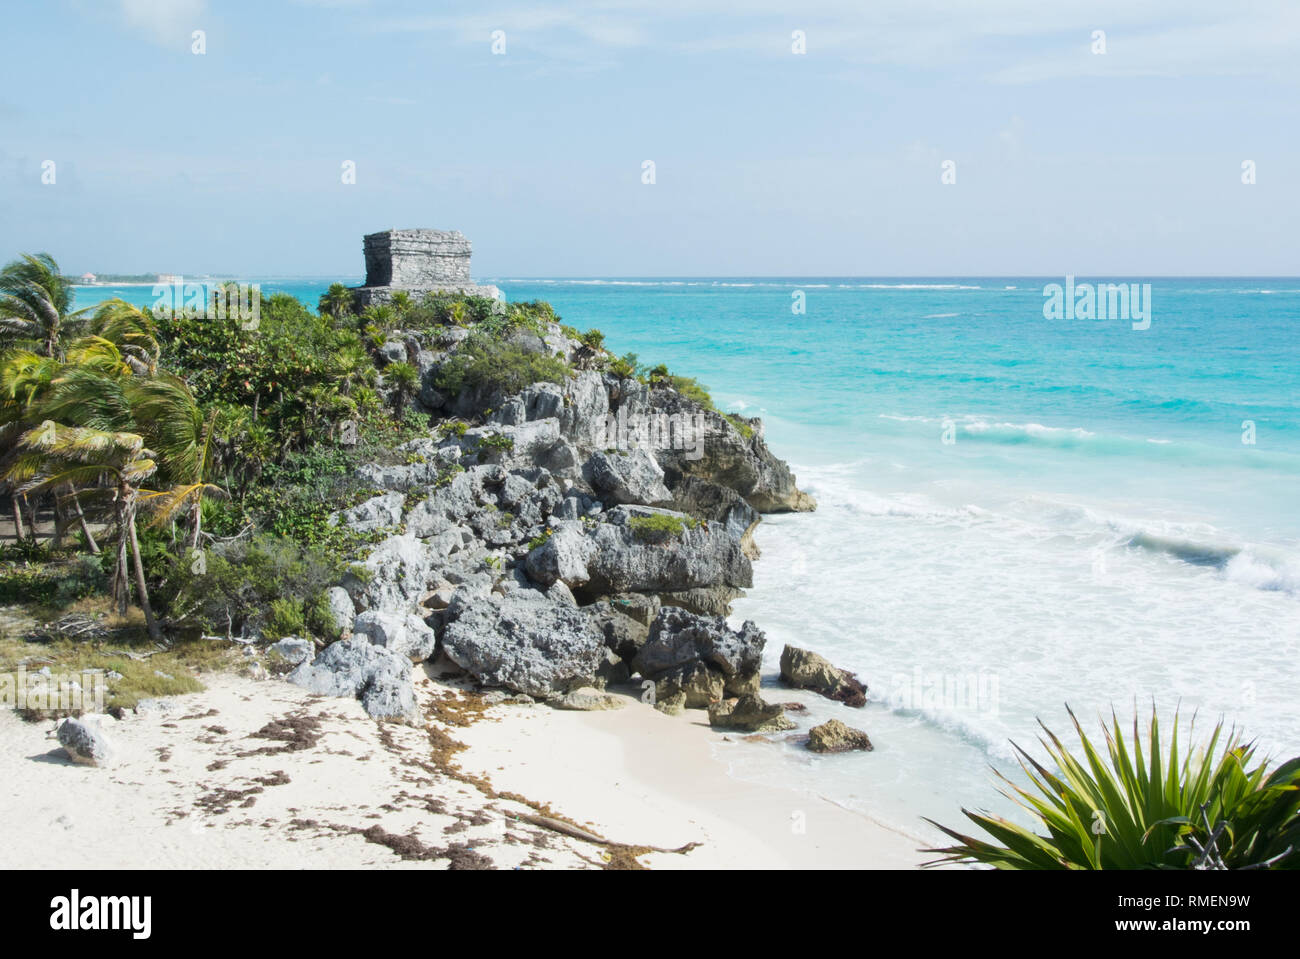 Ancient Mayan site of Tulum, Mexico Stock Photo